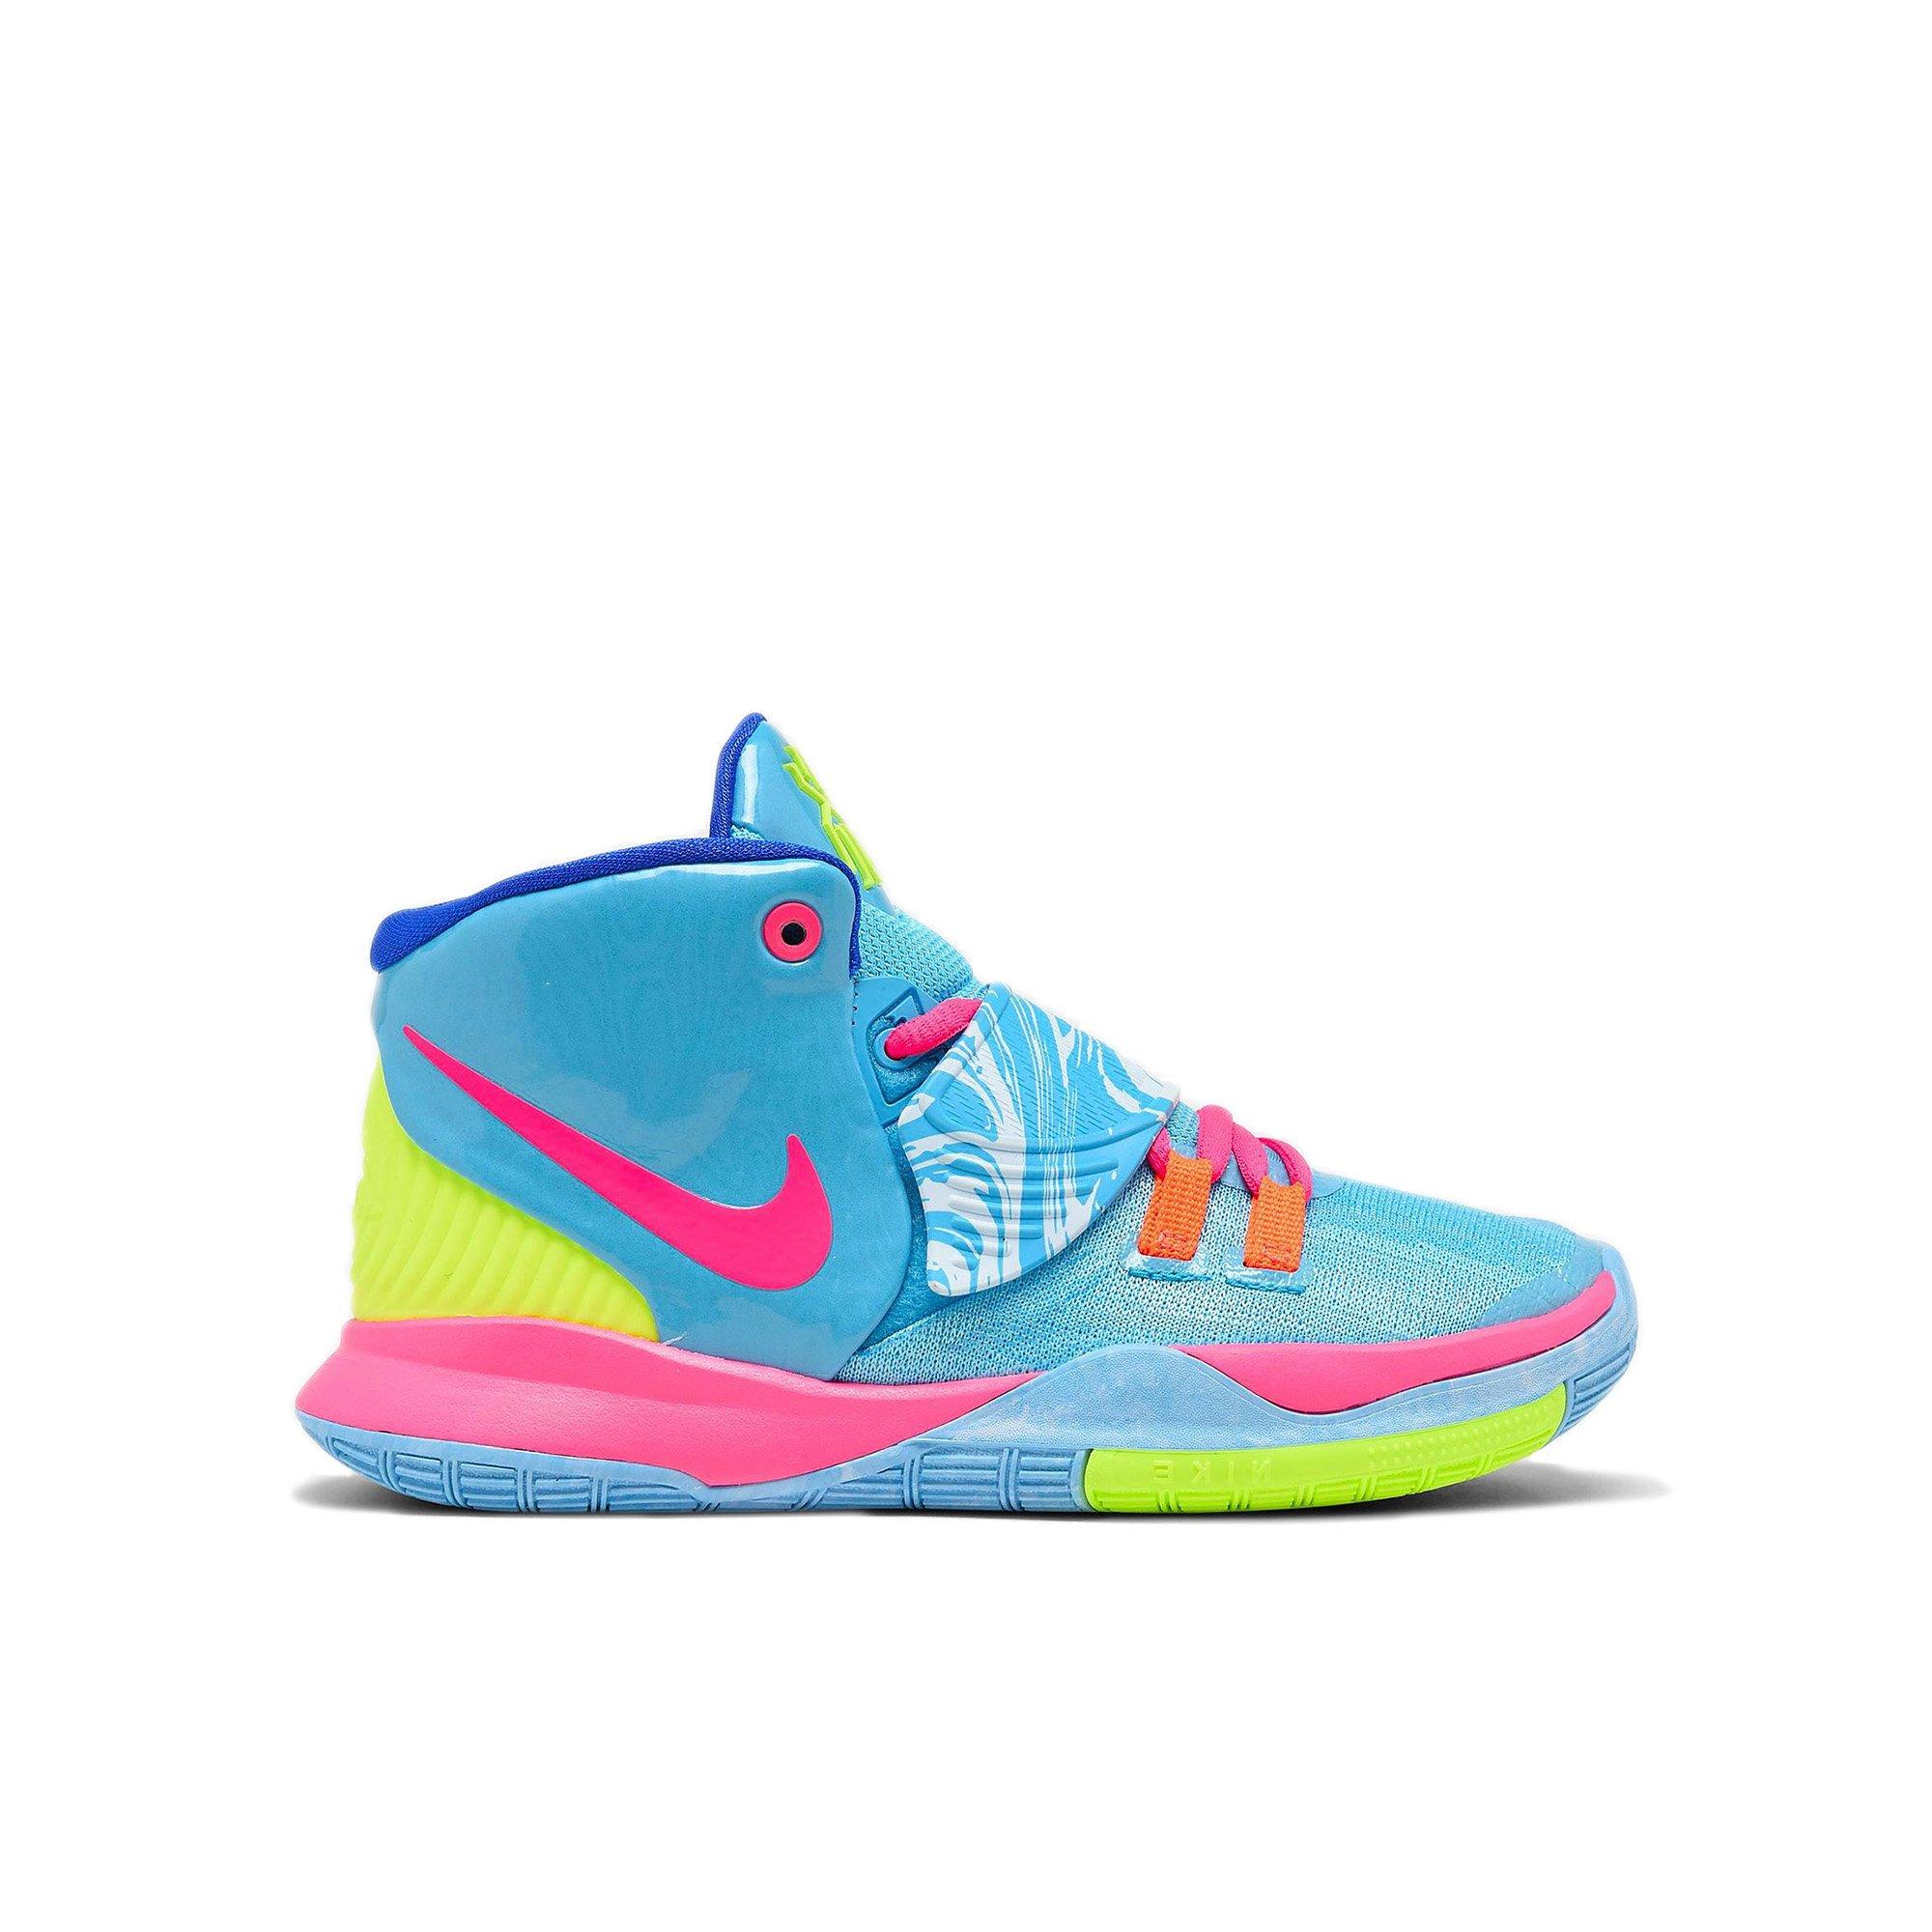 kyrie irving basketball shoes kids